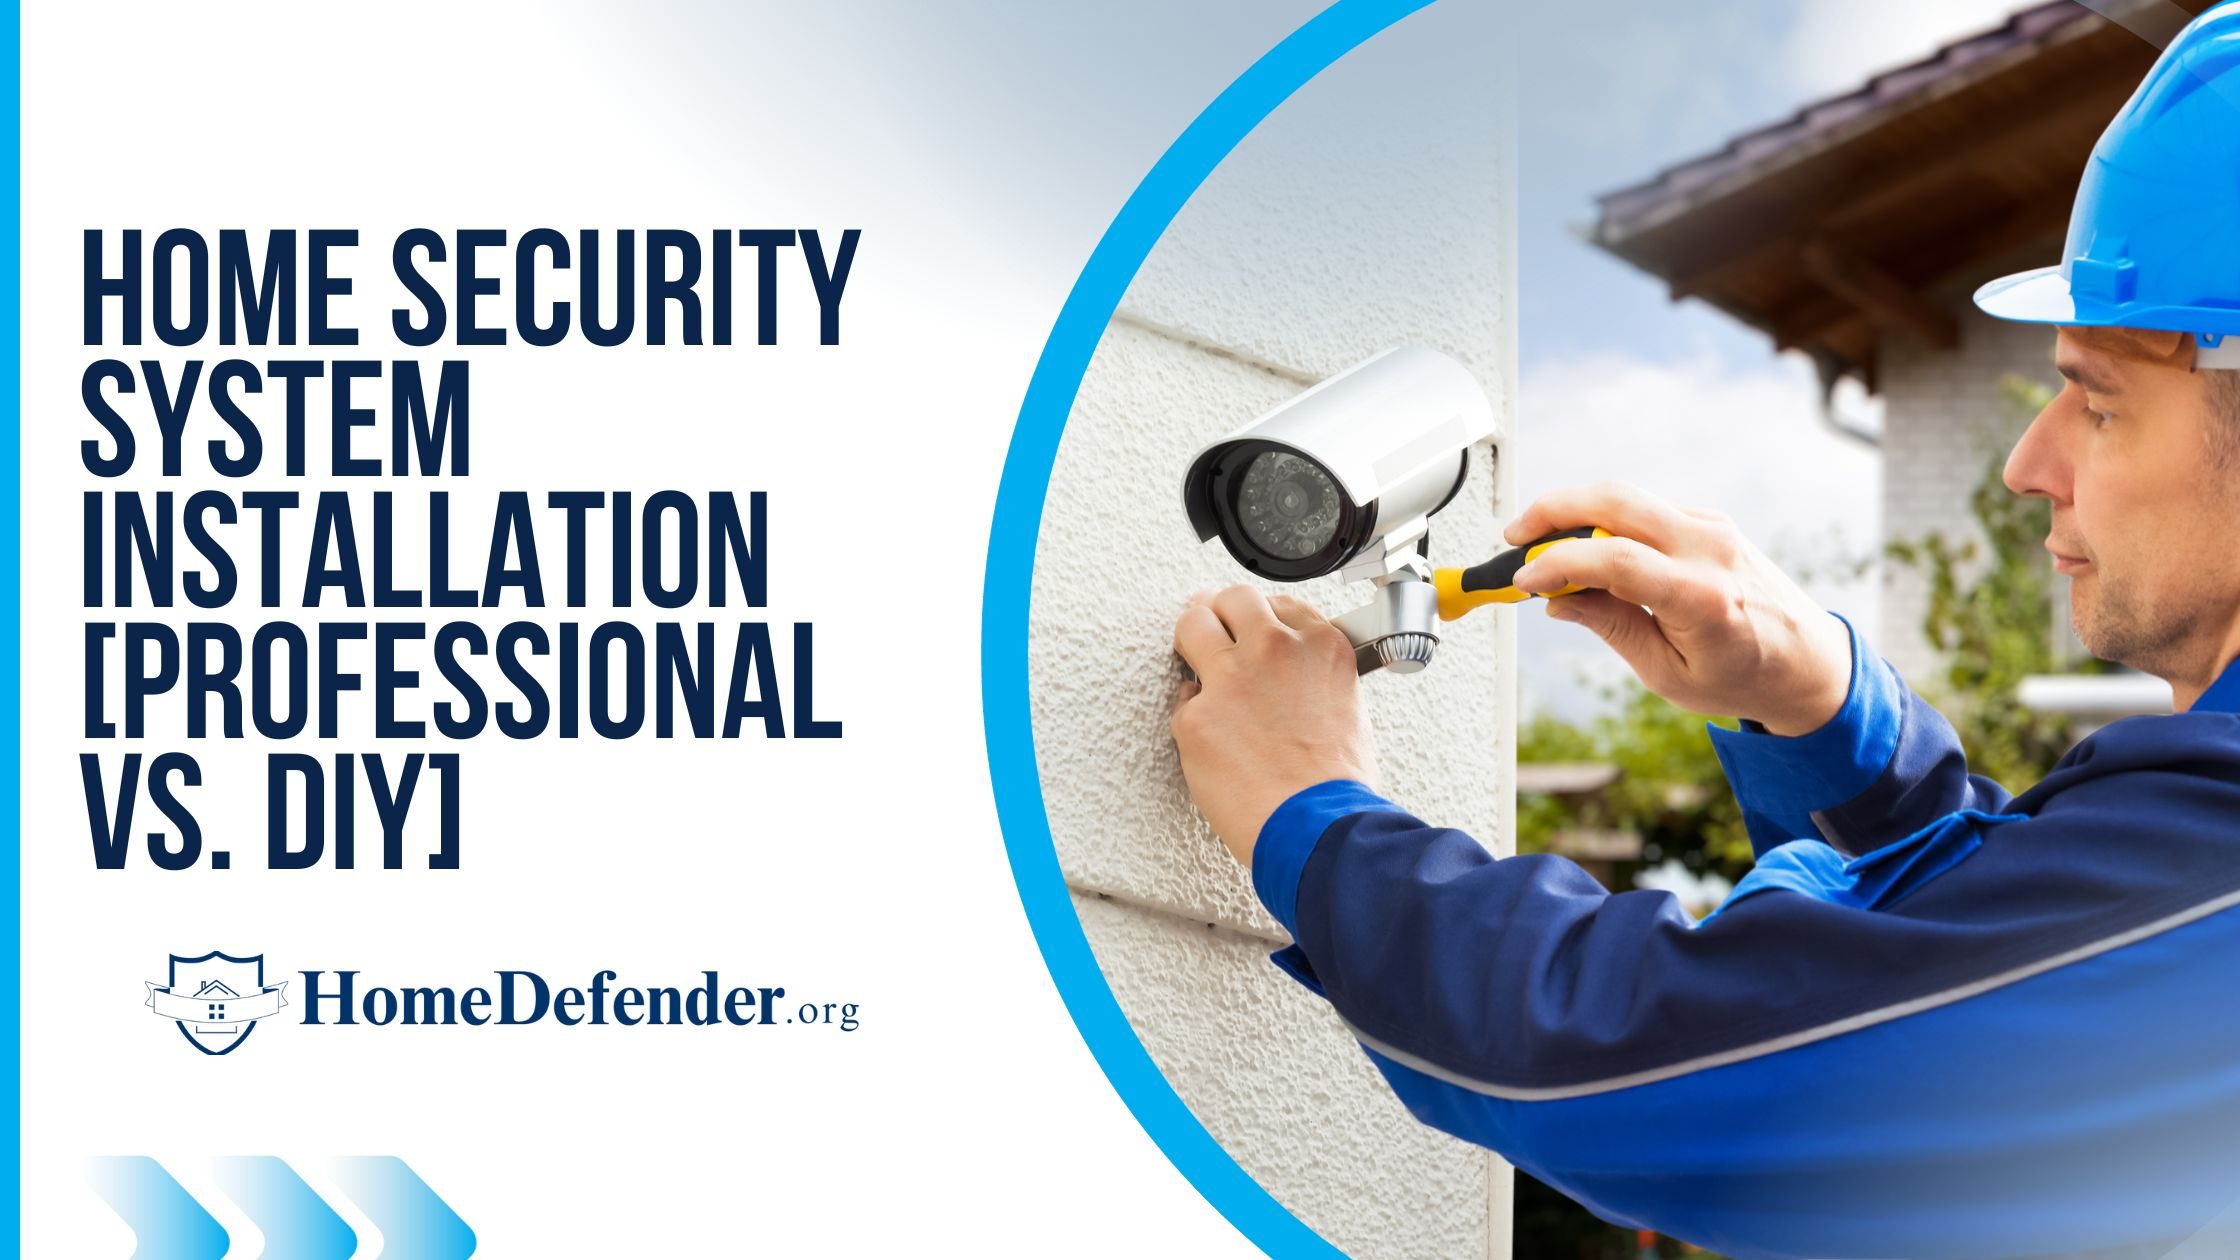 Home Security System Installation [Professional vs. DIY]